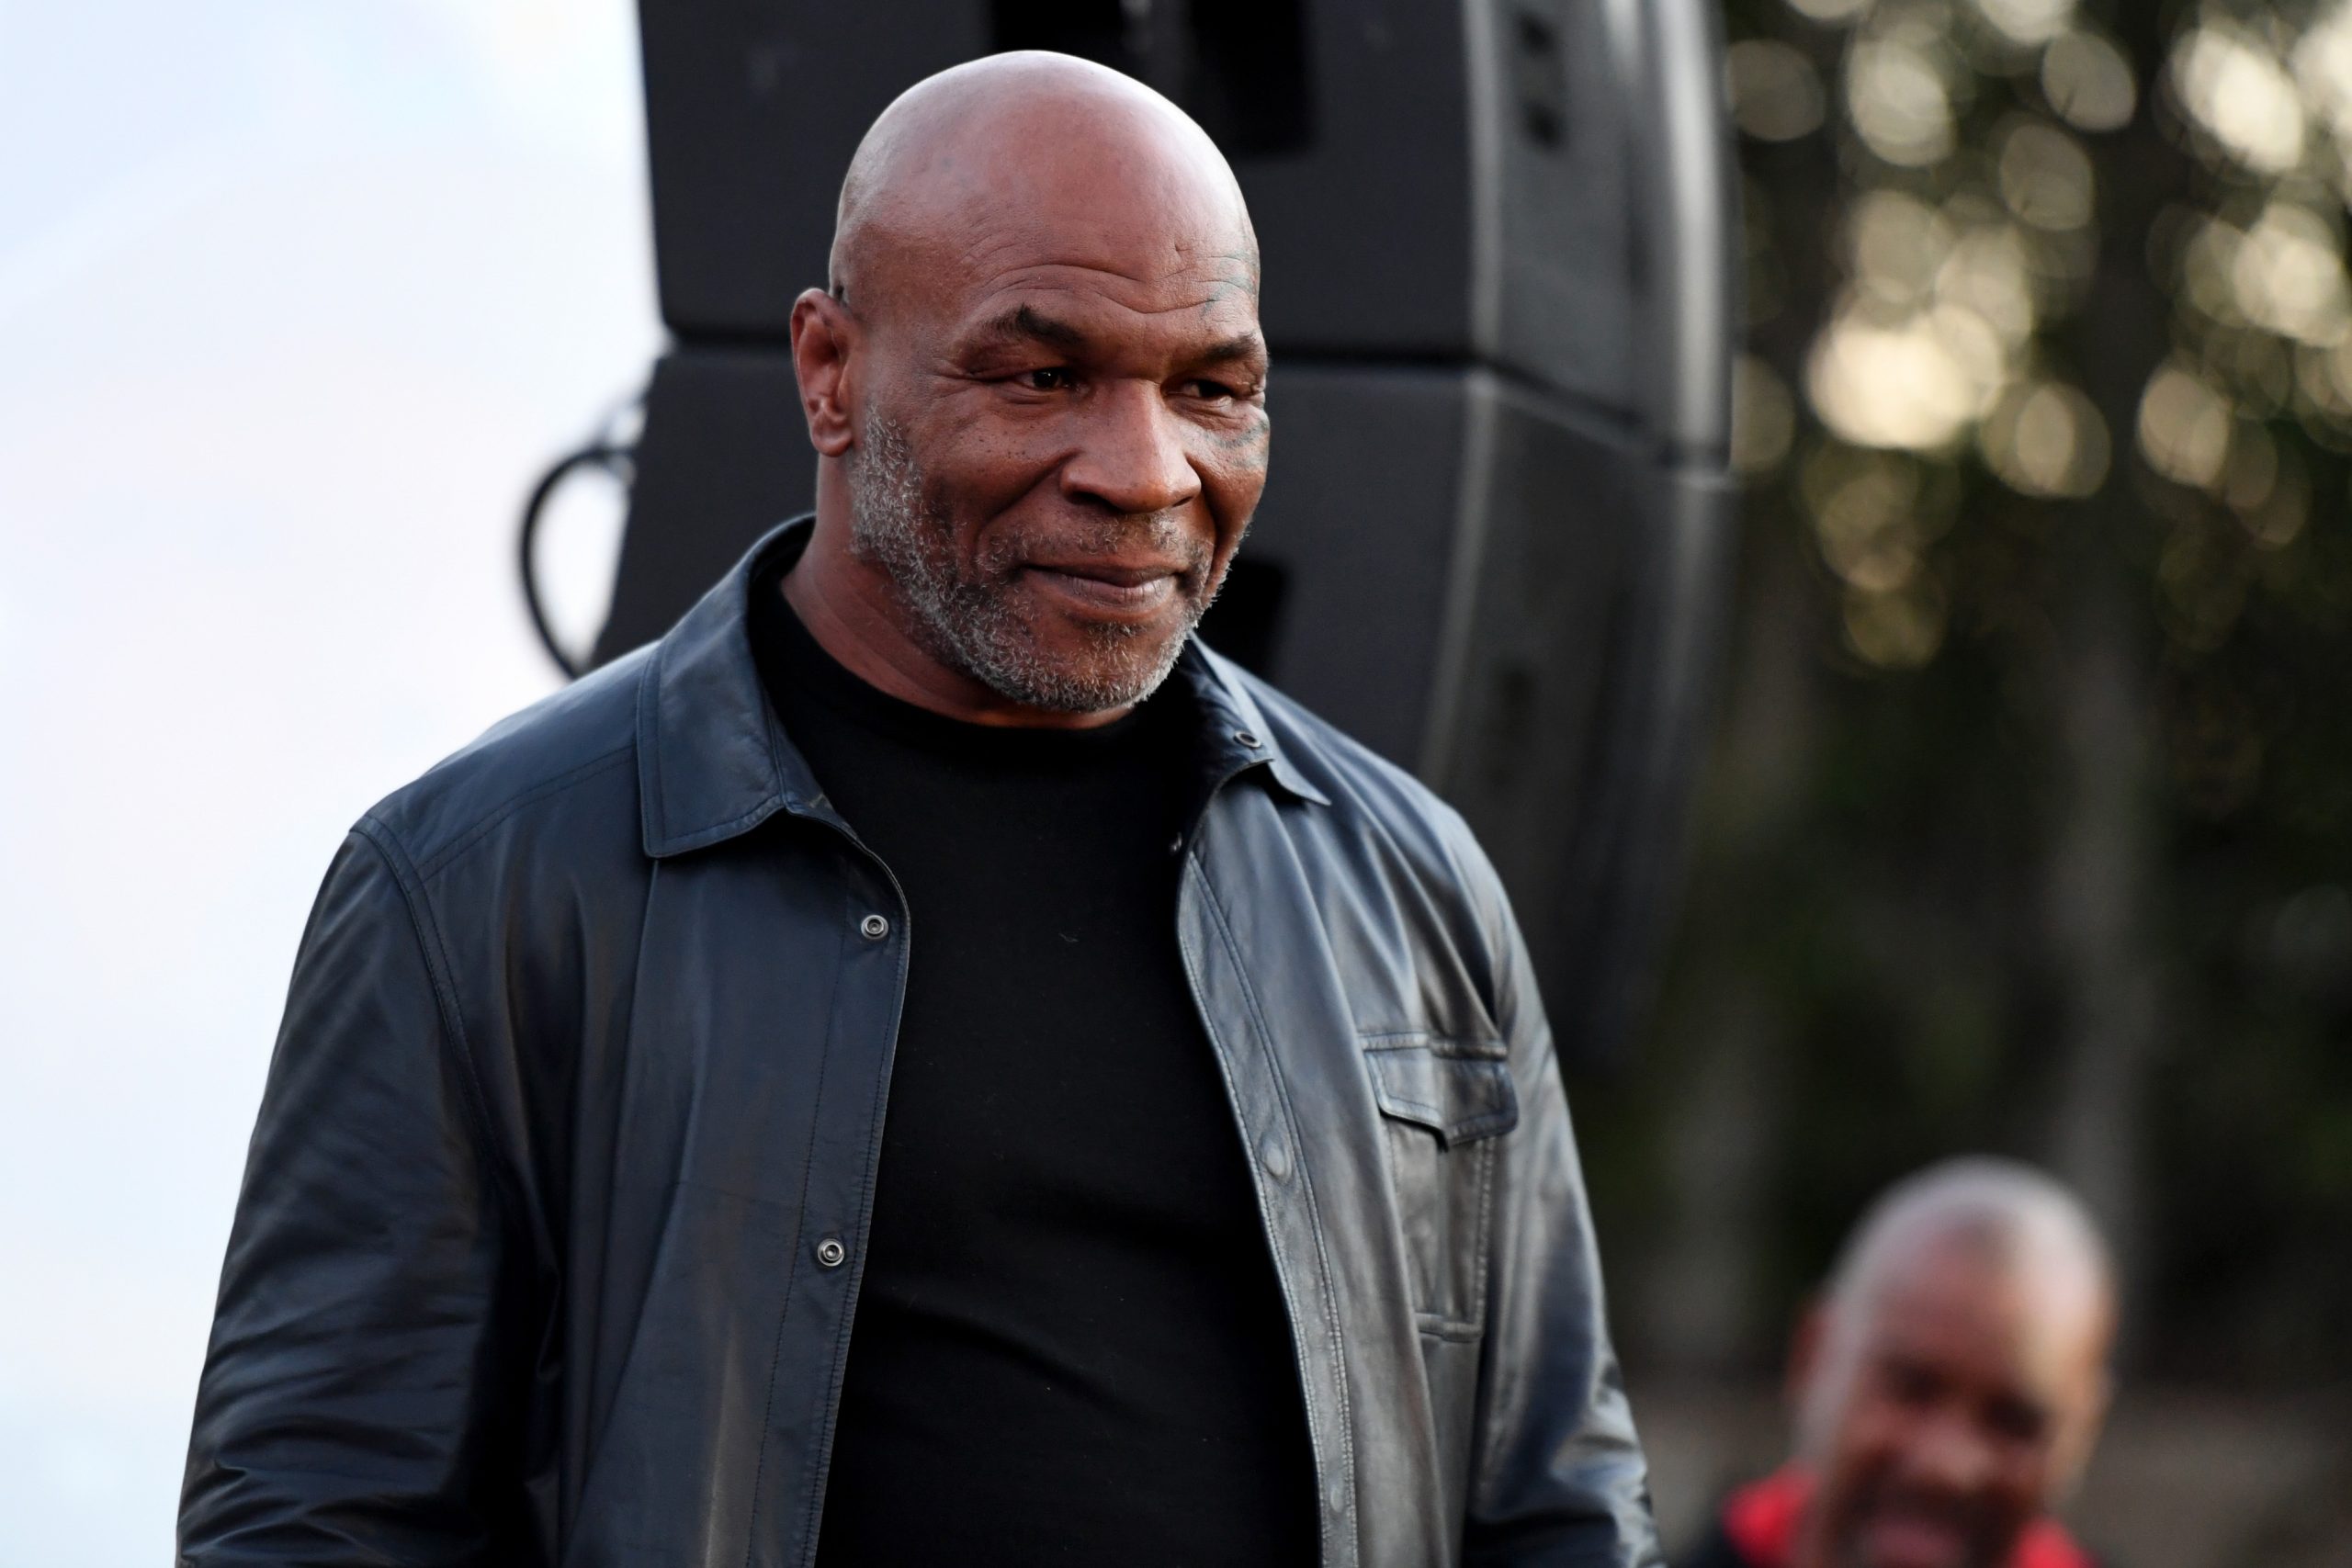 Former professional boxer Mike Tyson attends Celebration of Smiles Event hosted by Dionne Warwick.